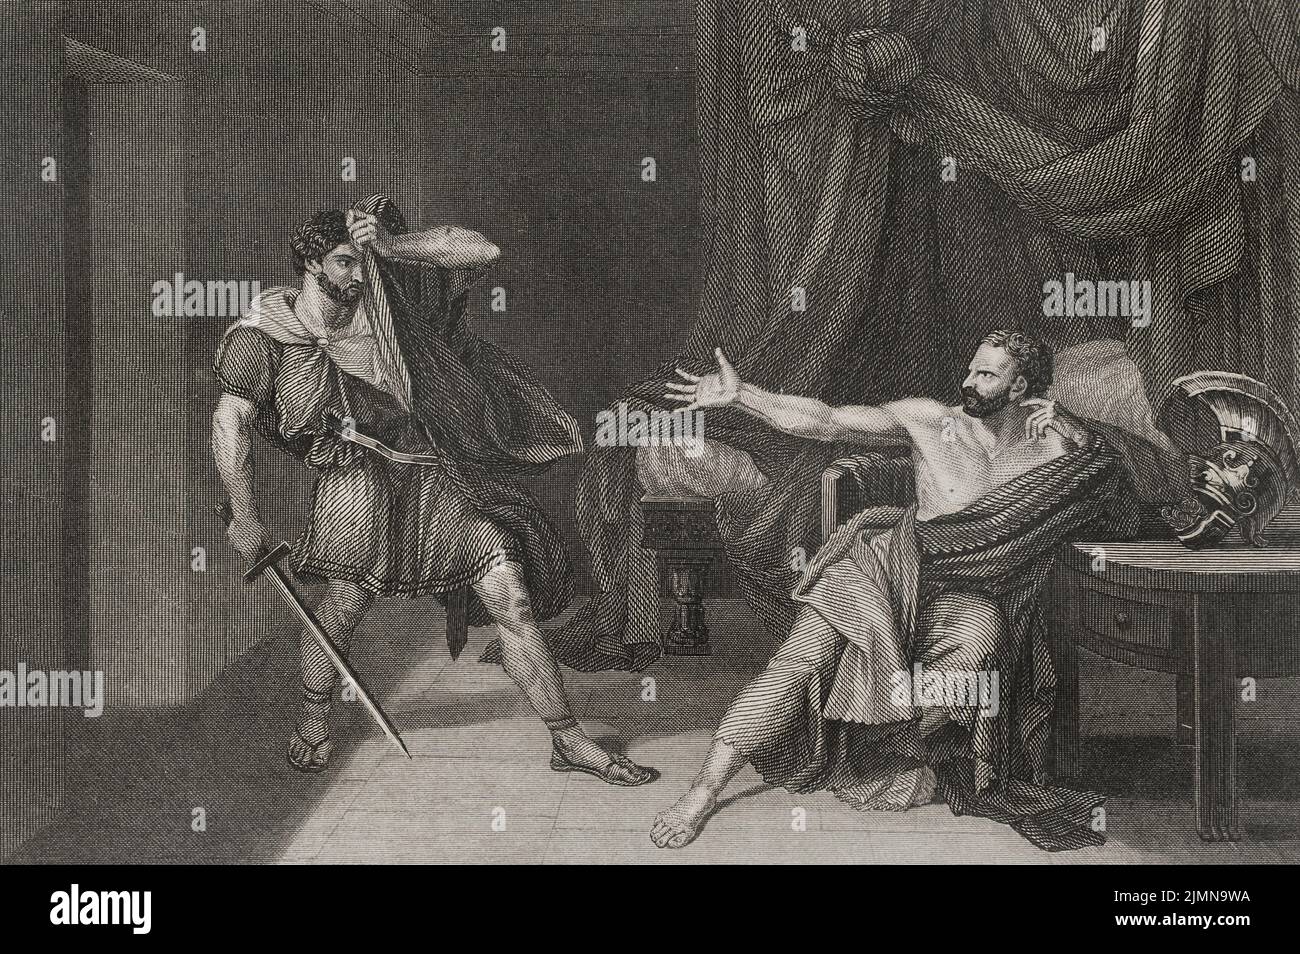 Gaius Marius (ca. 157 BC - 86 BC). Roman general and consul. Marius prisoner at Minturnae. It depicts the attempted execution of the consul Gaius Marius when he was captured in Minturnae. Engraving after a painting by Jean-Germain Drouais. 'Historia Universal', by César Cantú. Volume II, 1854. Stock Photo